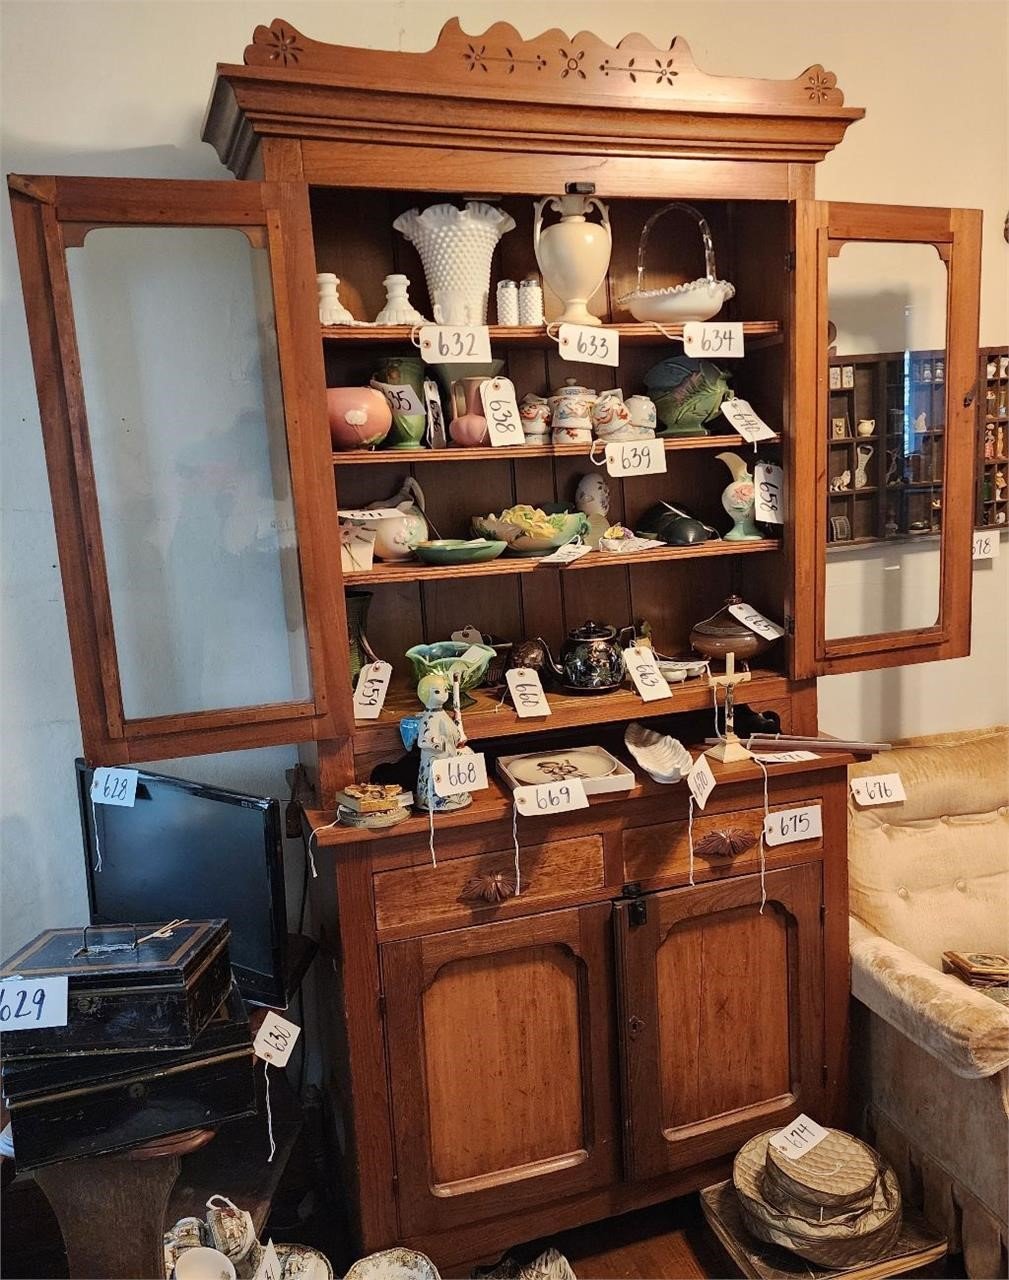 Ann Sager: Antiques, Household, Napoleon, Oh Auction